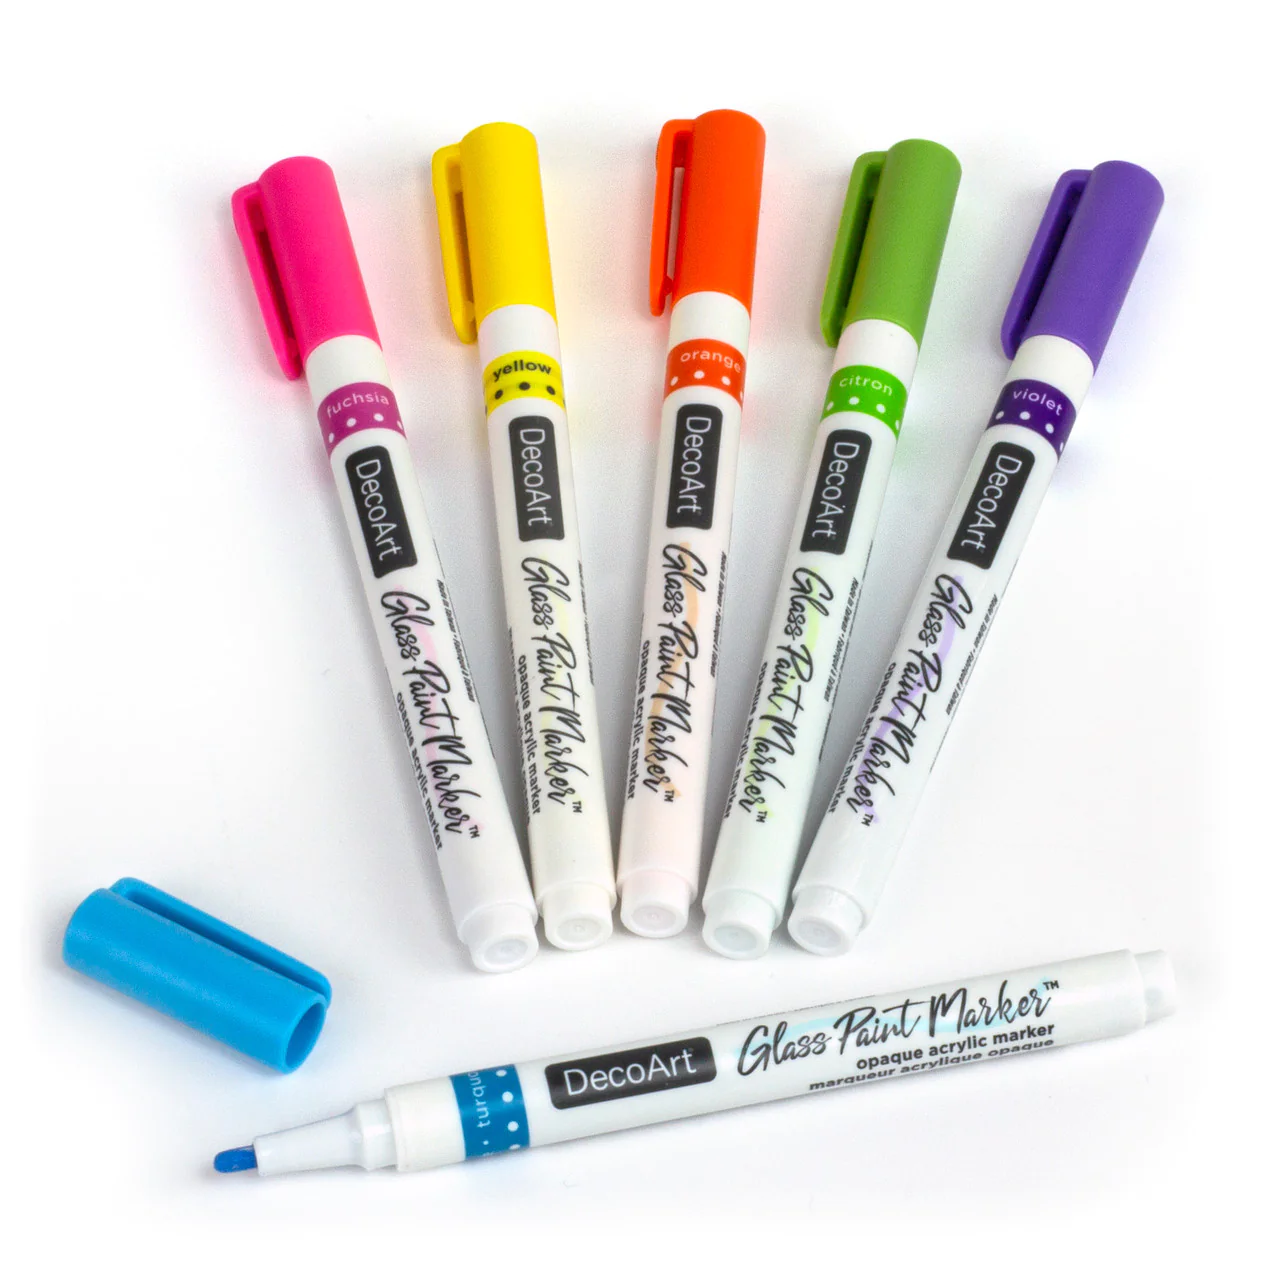 Are acrylic markers safe for kids